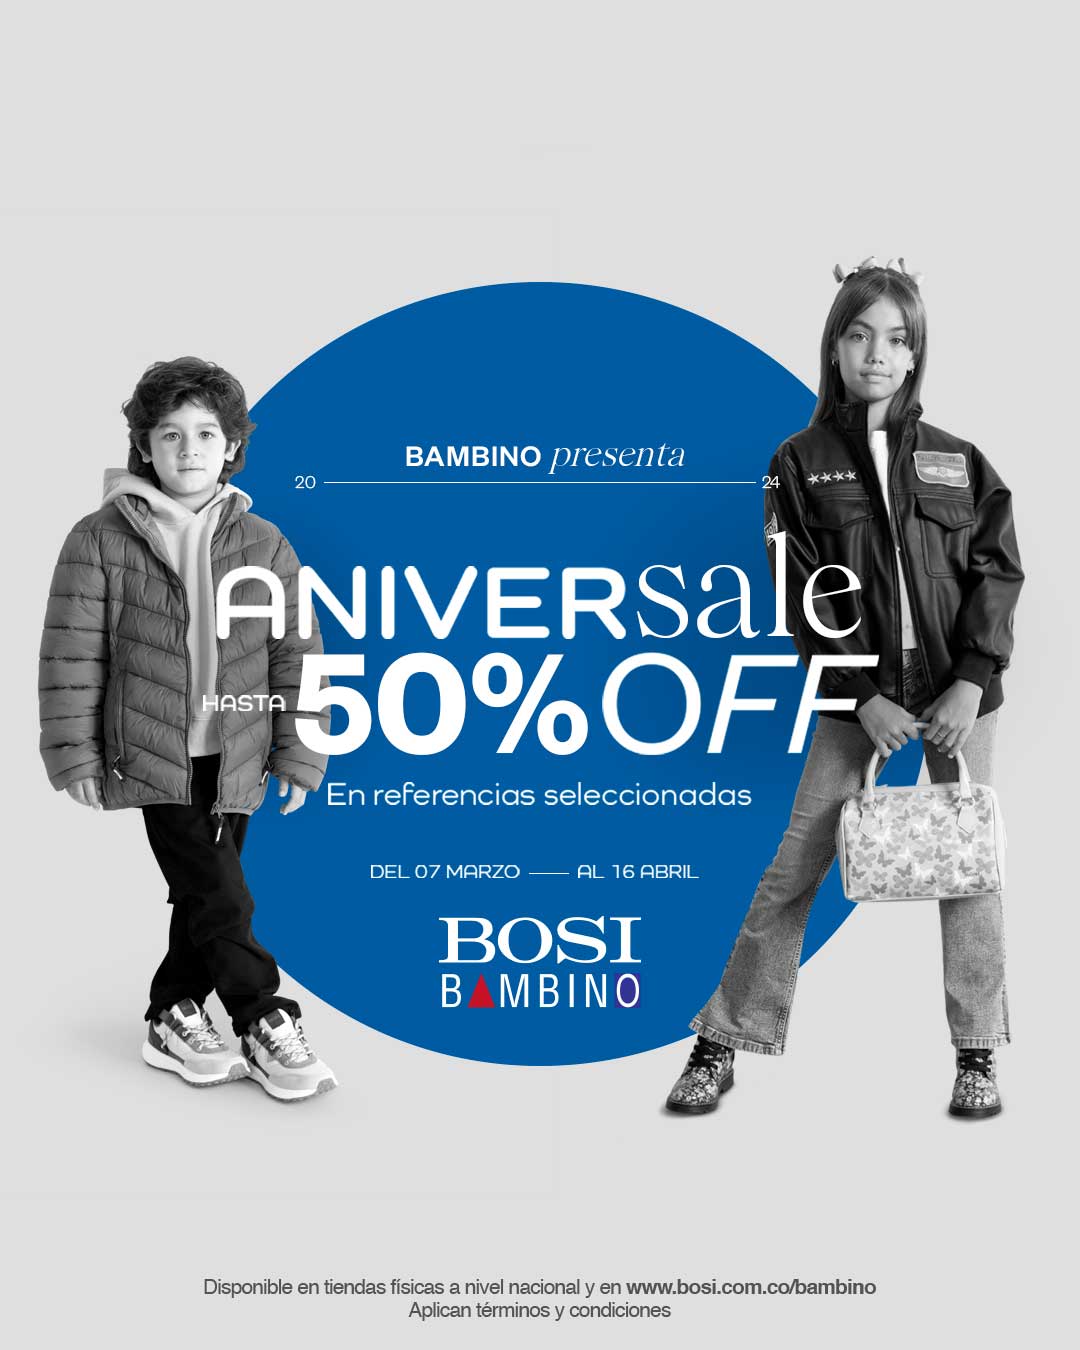 ¡ ANIVERSALE 50% OFF !